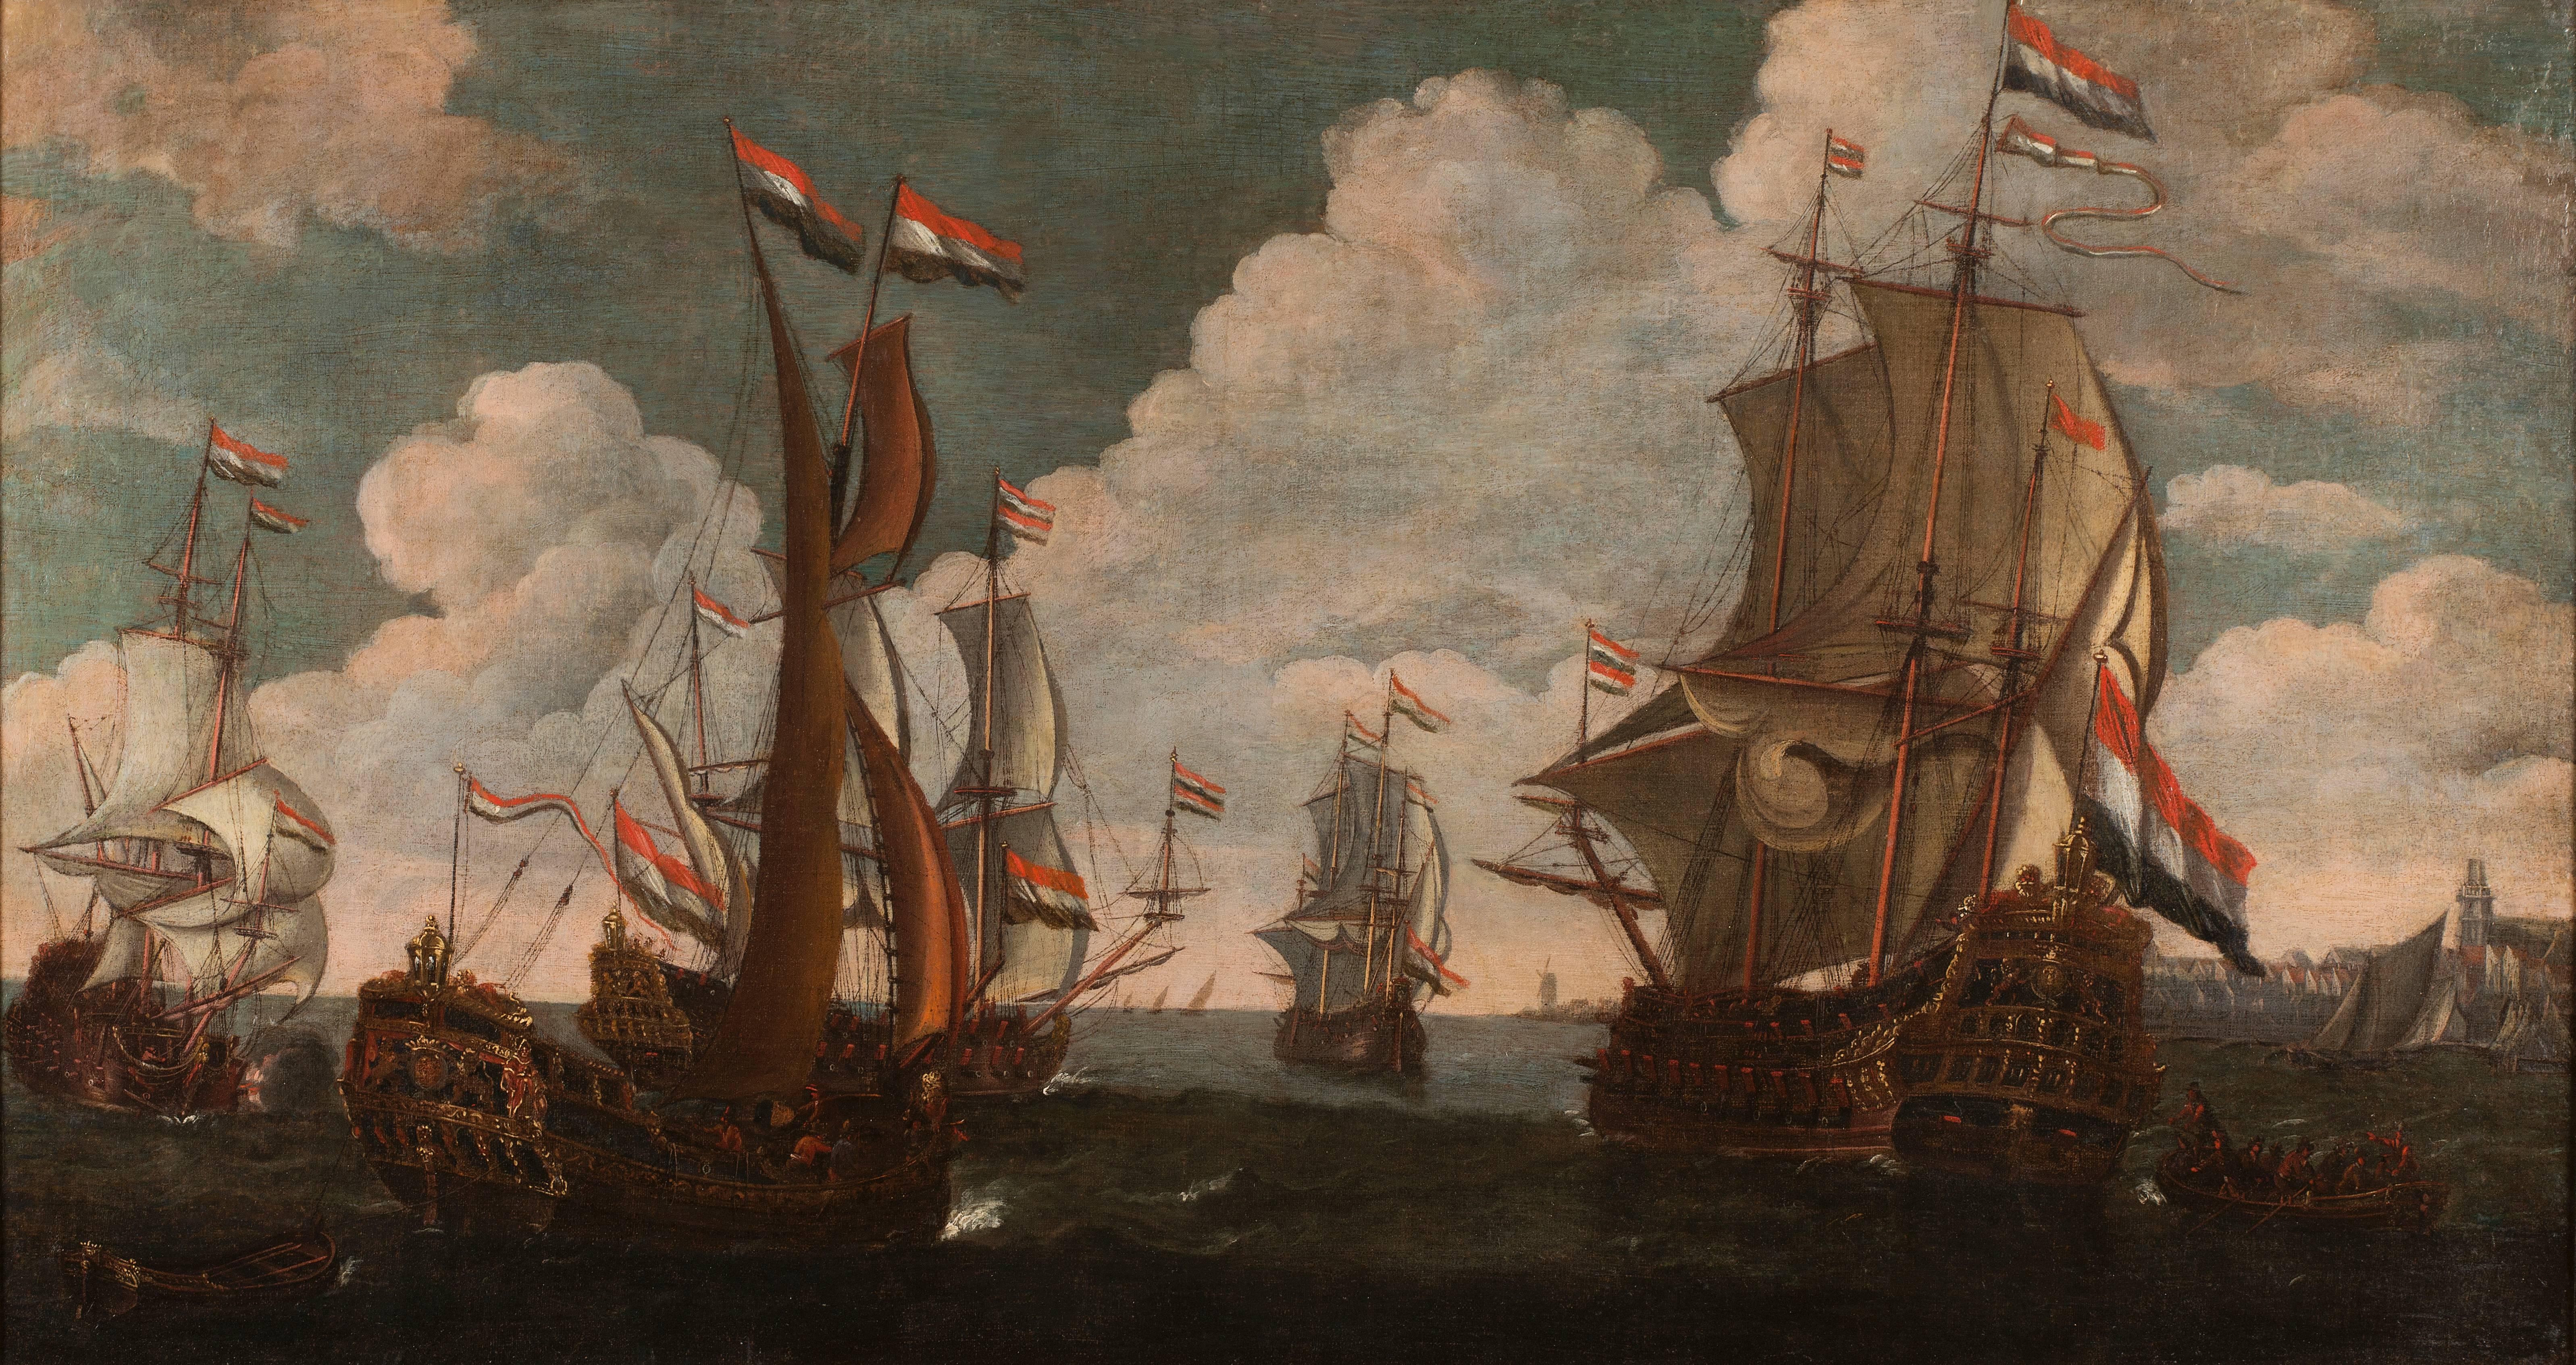 For sale on 1stdibs a 17th Century old masters oil on Canvas marine attributed to Van de Velde. Willem Van de Vende, the Younger (1633-1707) was a Dutch Marine painter son of Willem van de Velde the Elder, also a painter of sea-pieces, Willem van de